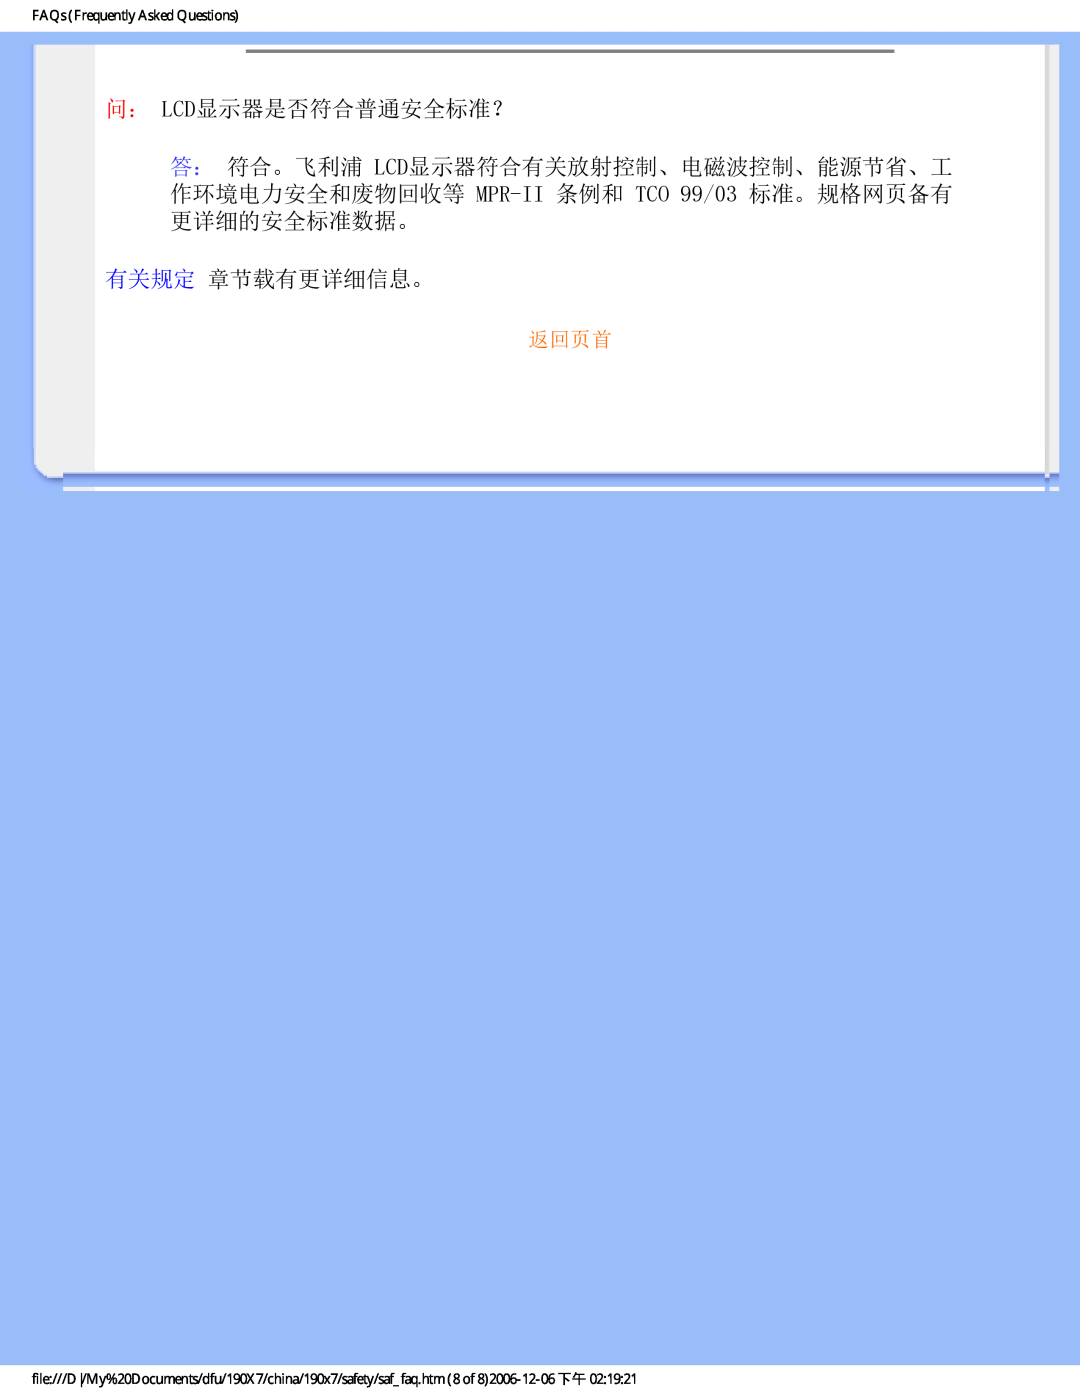 Philips 190X7 user manual 问： Lcd显示器是否符合普通安全标准？, 有关规定 章节载有更详细信息。, 返回页首, FAQs Frequently Asked Questions 